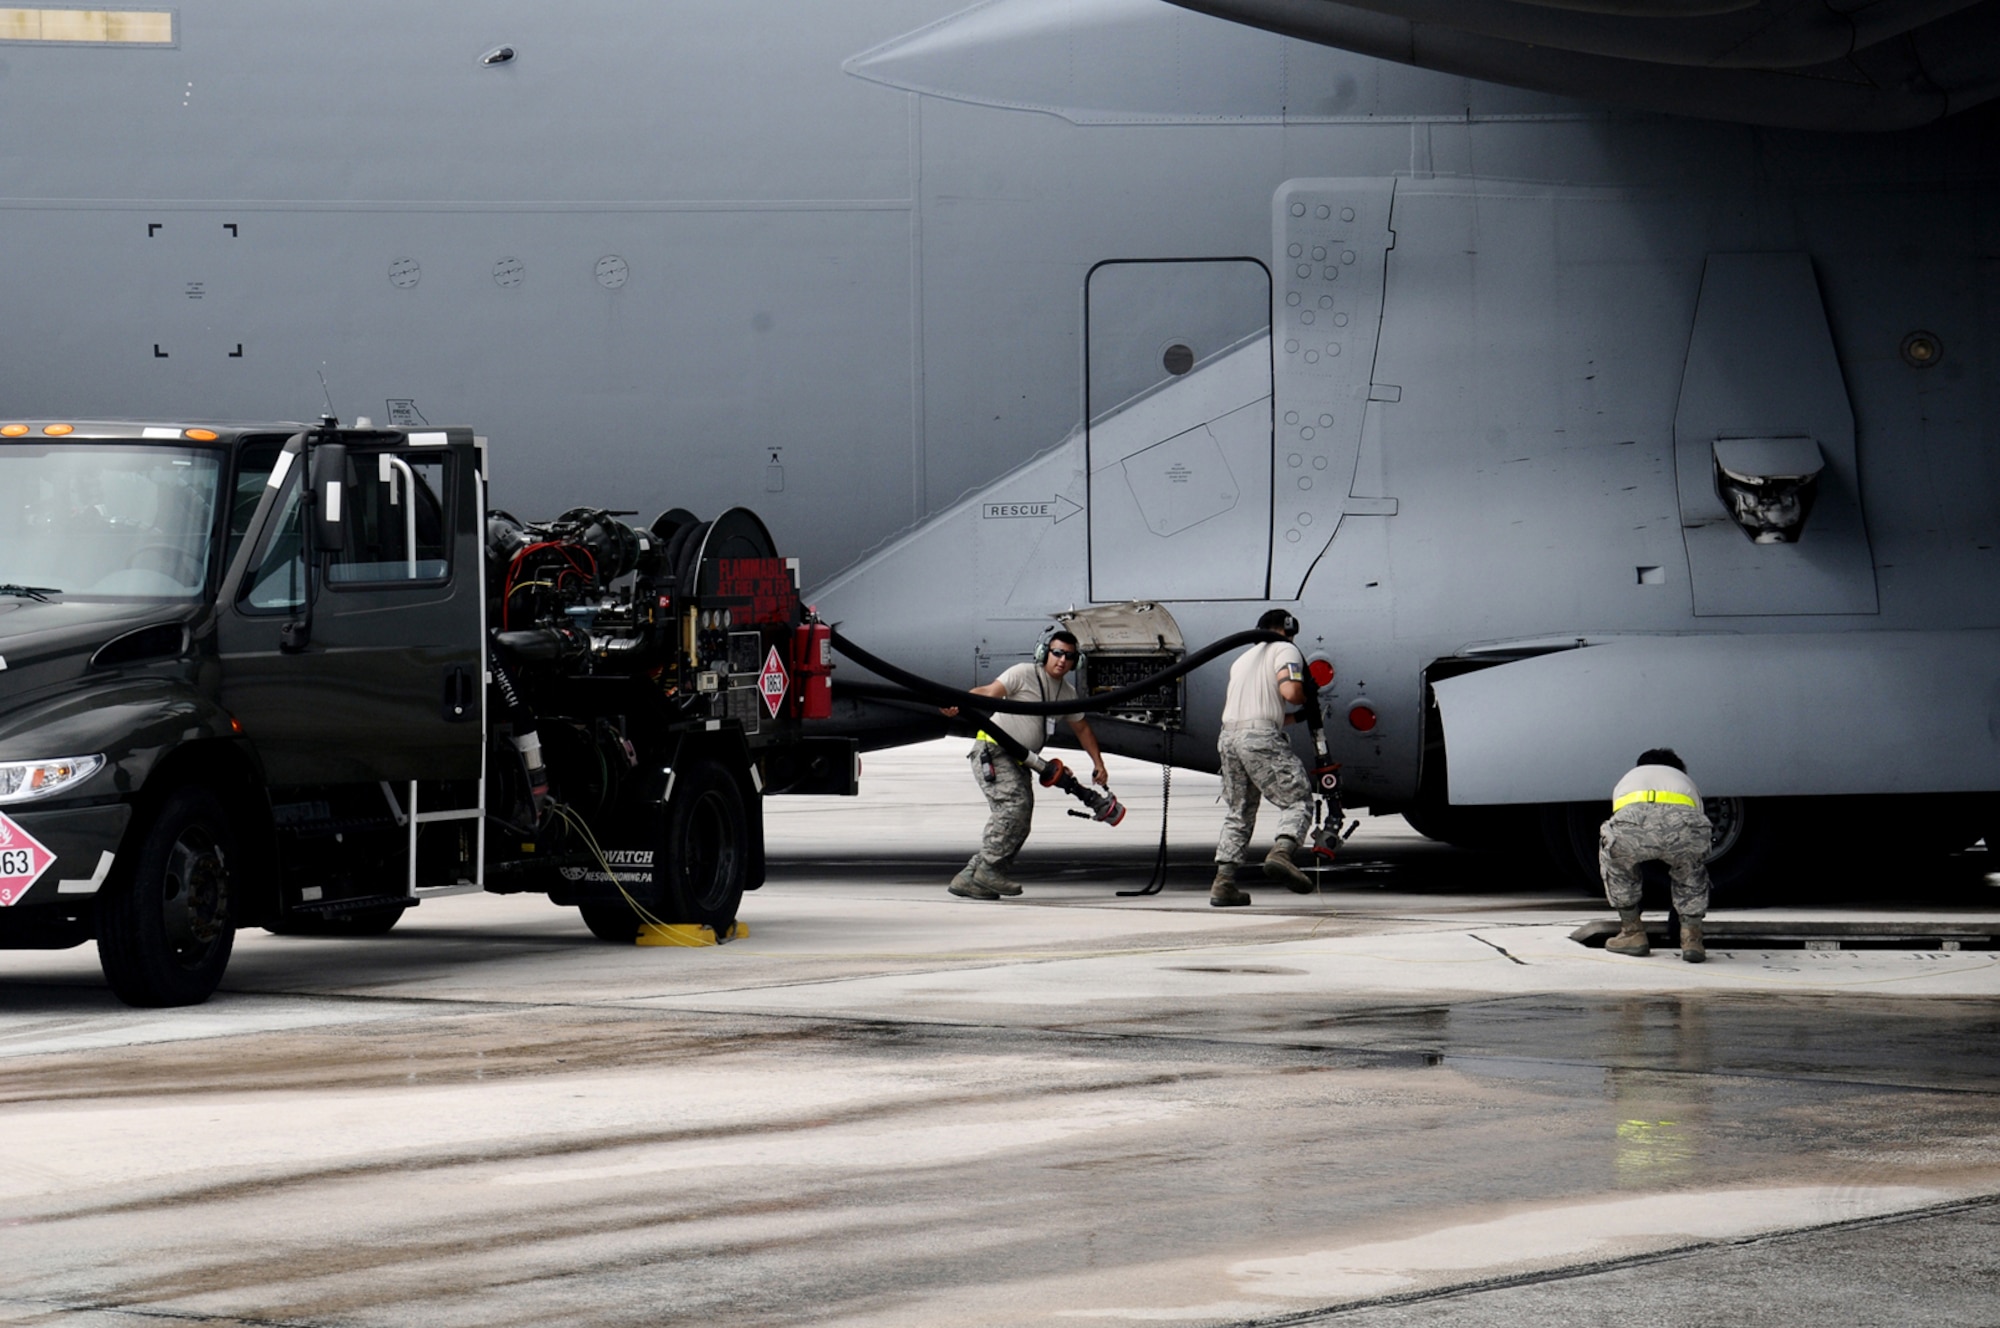 ANDERSEN AIR FORCE BASE, Guam—Servicemembers work together to fuel an aircraft on the flightline here, Sept. 7. Team Andersen fuels some of the United States largest joint and coalition exercises in the Asia-Pacific region. (U.S. Air Force photo by Airman 1st Class Mariah Haddenham/Released)